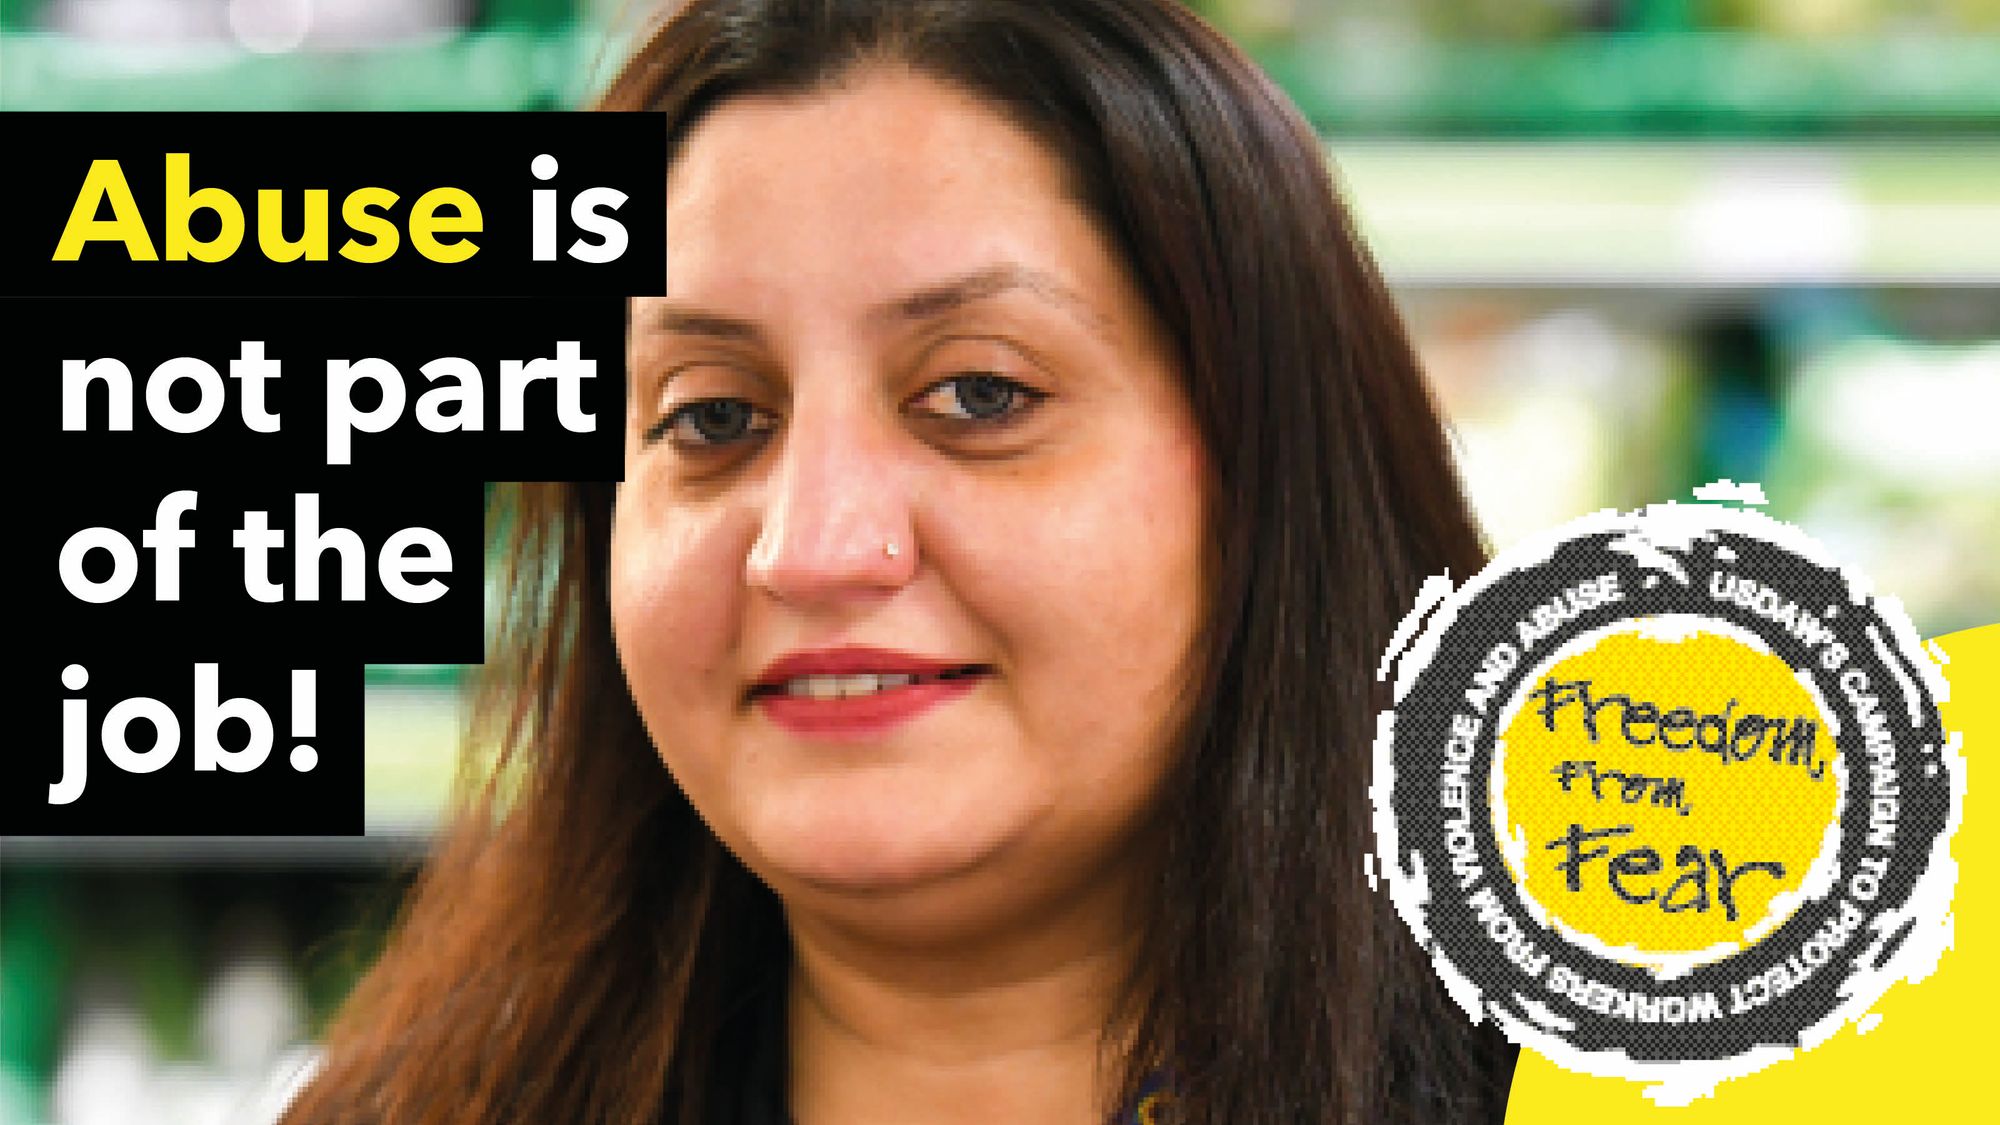 We are backing the Usdaw Freedom From Fear campaign to encourage people to respect shopworkers